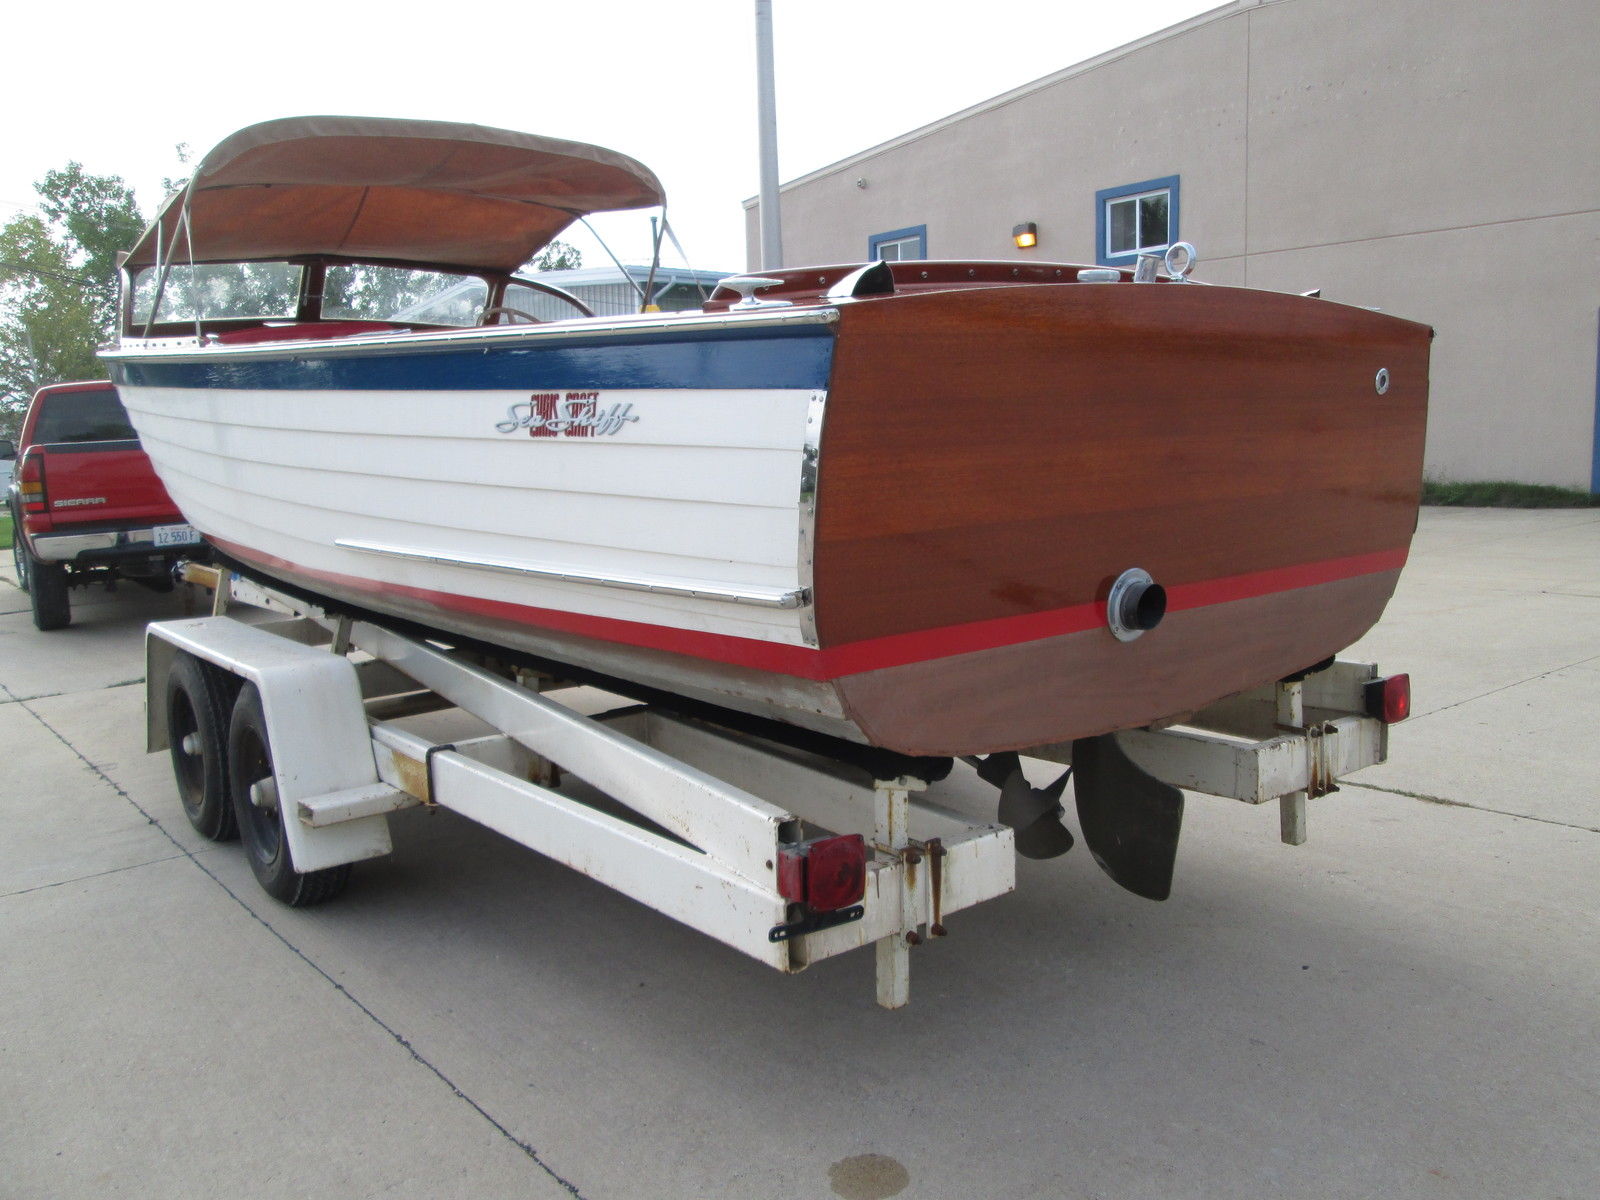 Chris-Craft Sea Skiff 1955 for sale for $12,500 - Boats 